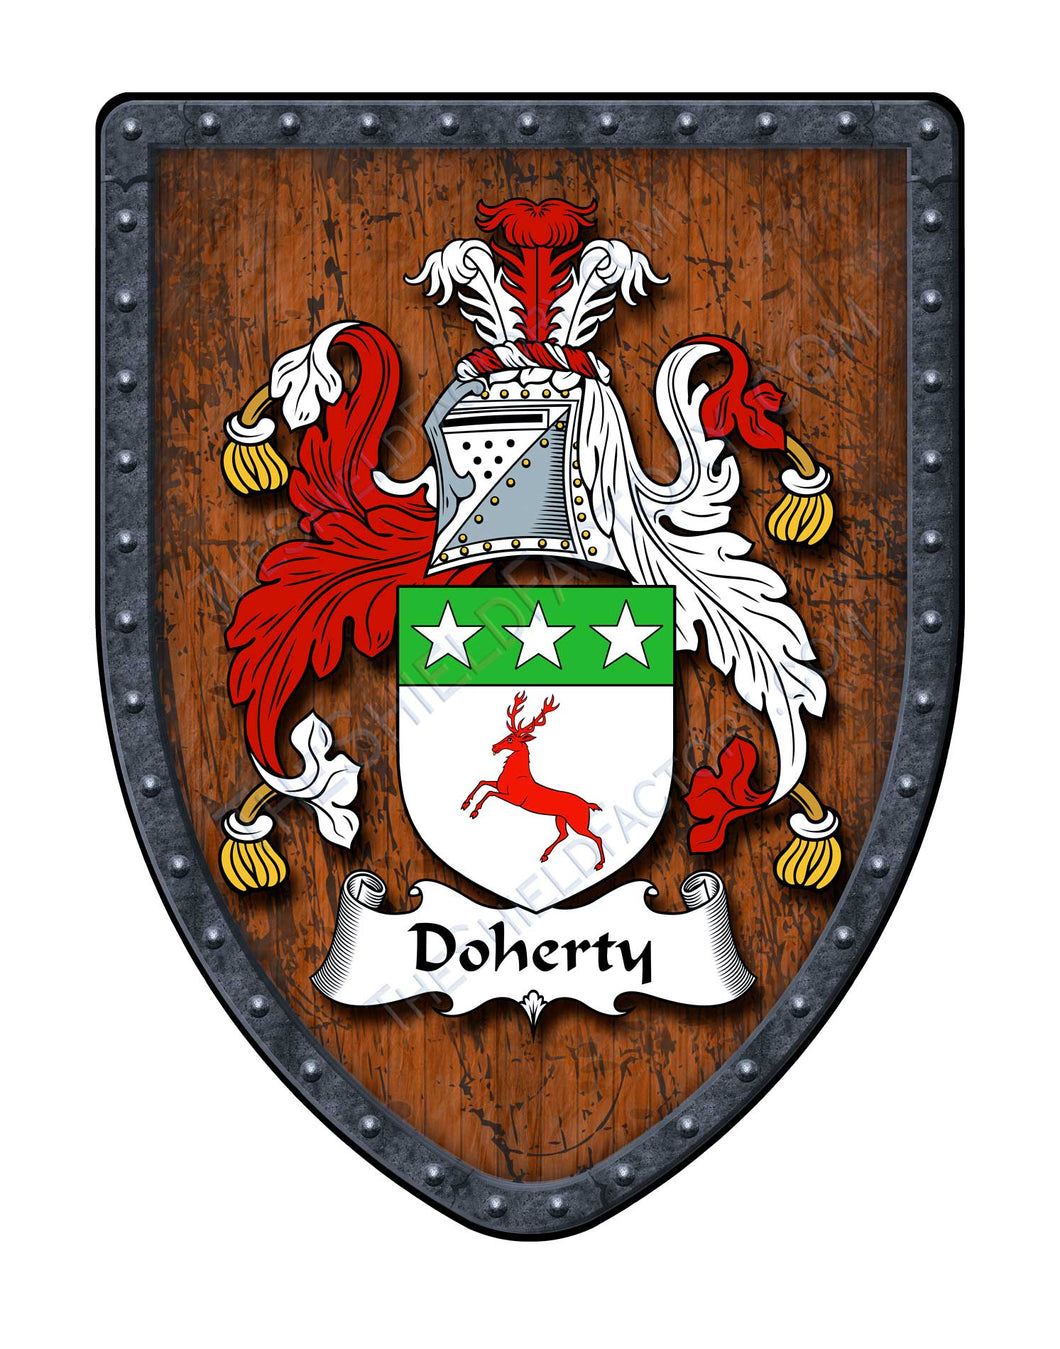 Doherty Coat of Arms Family Crest